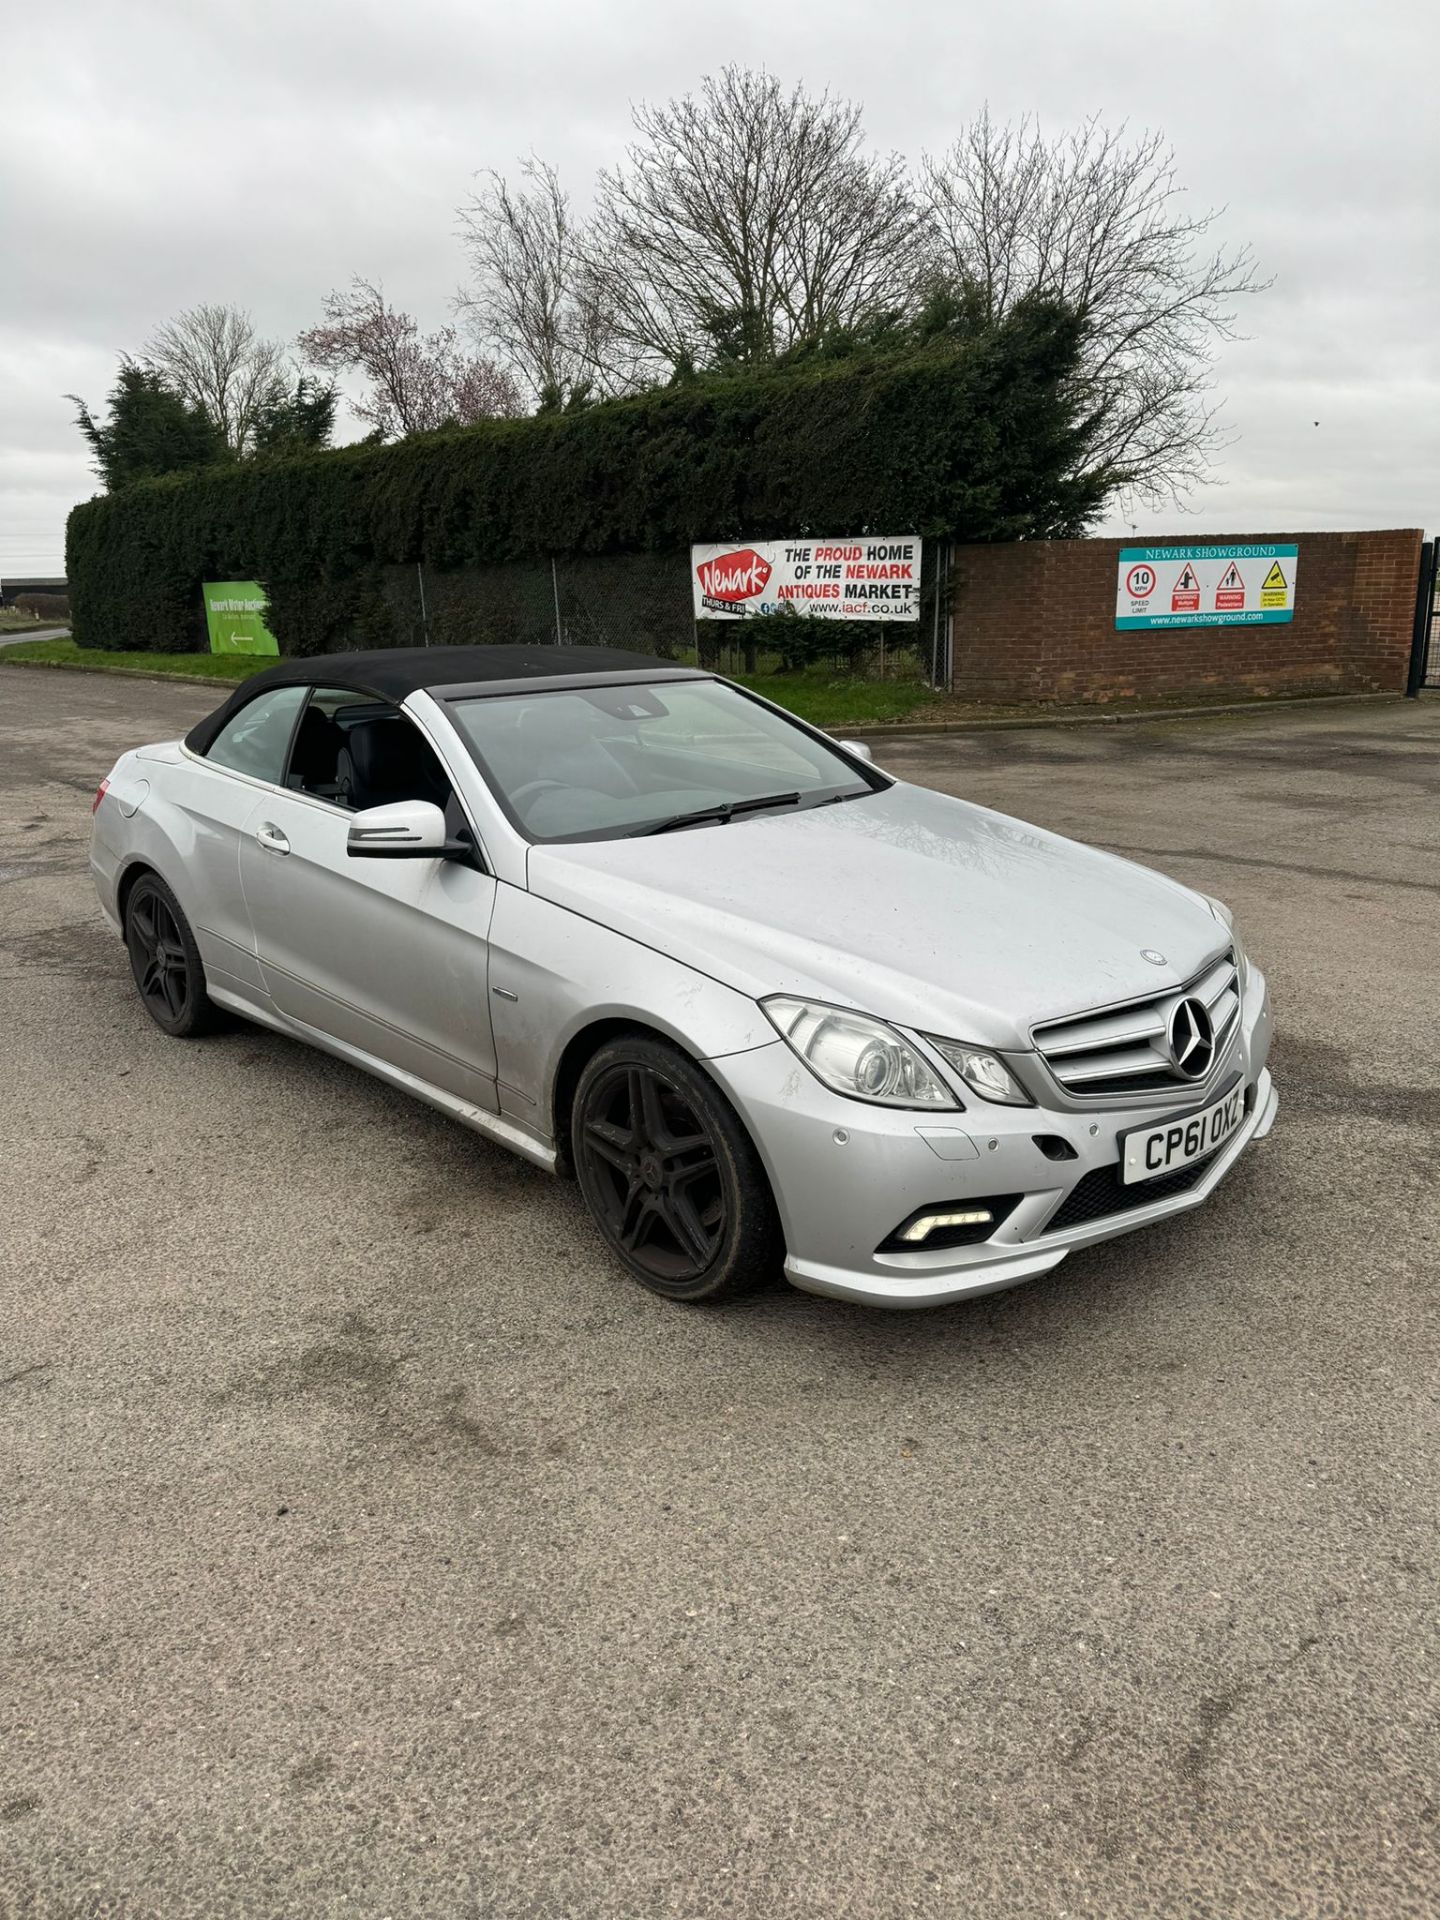 2011 61 MERCEDES E350 CONVERTIBLE - 75K MILES - 1 OWNER - Image 6 of 12